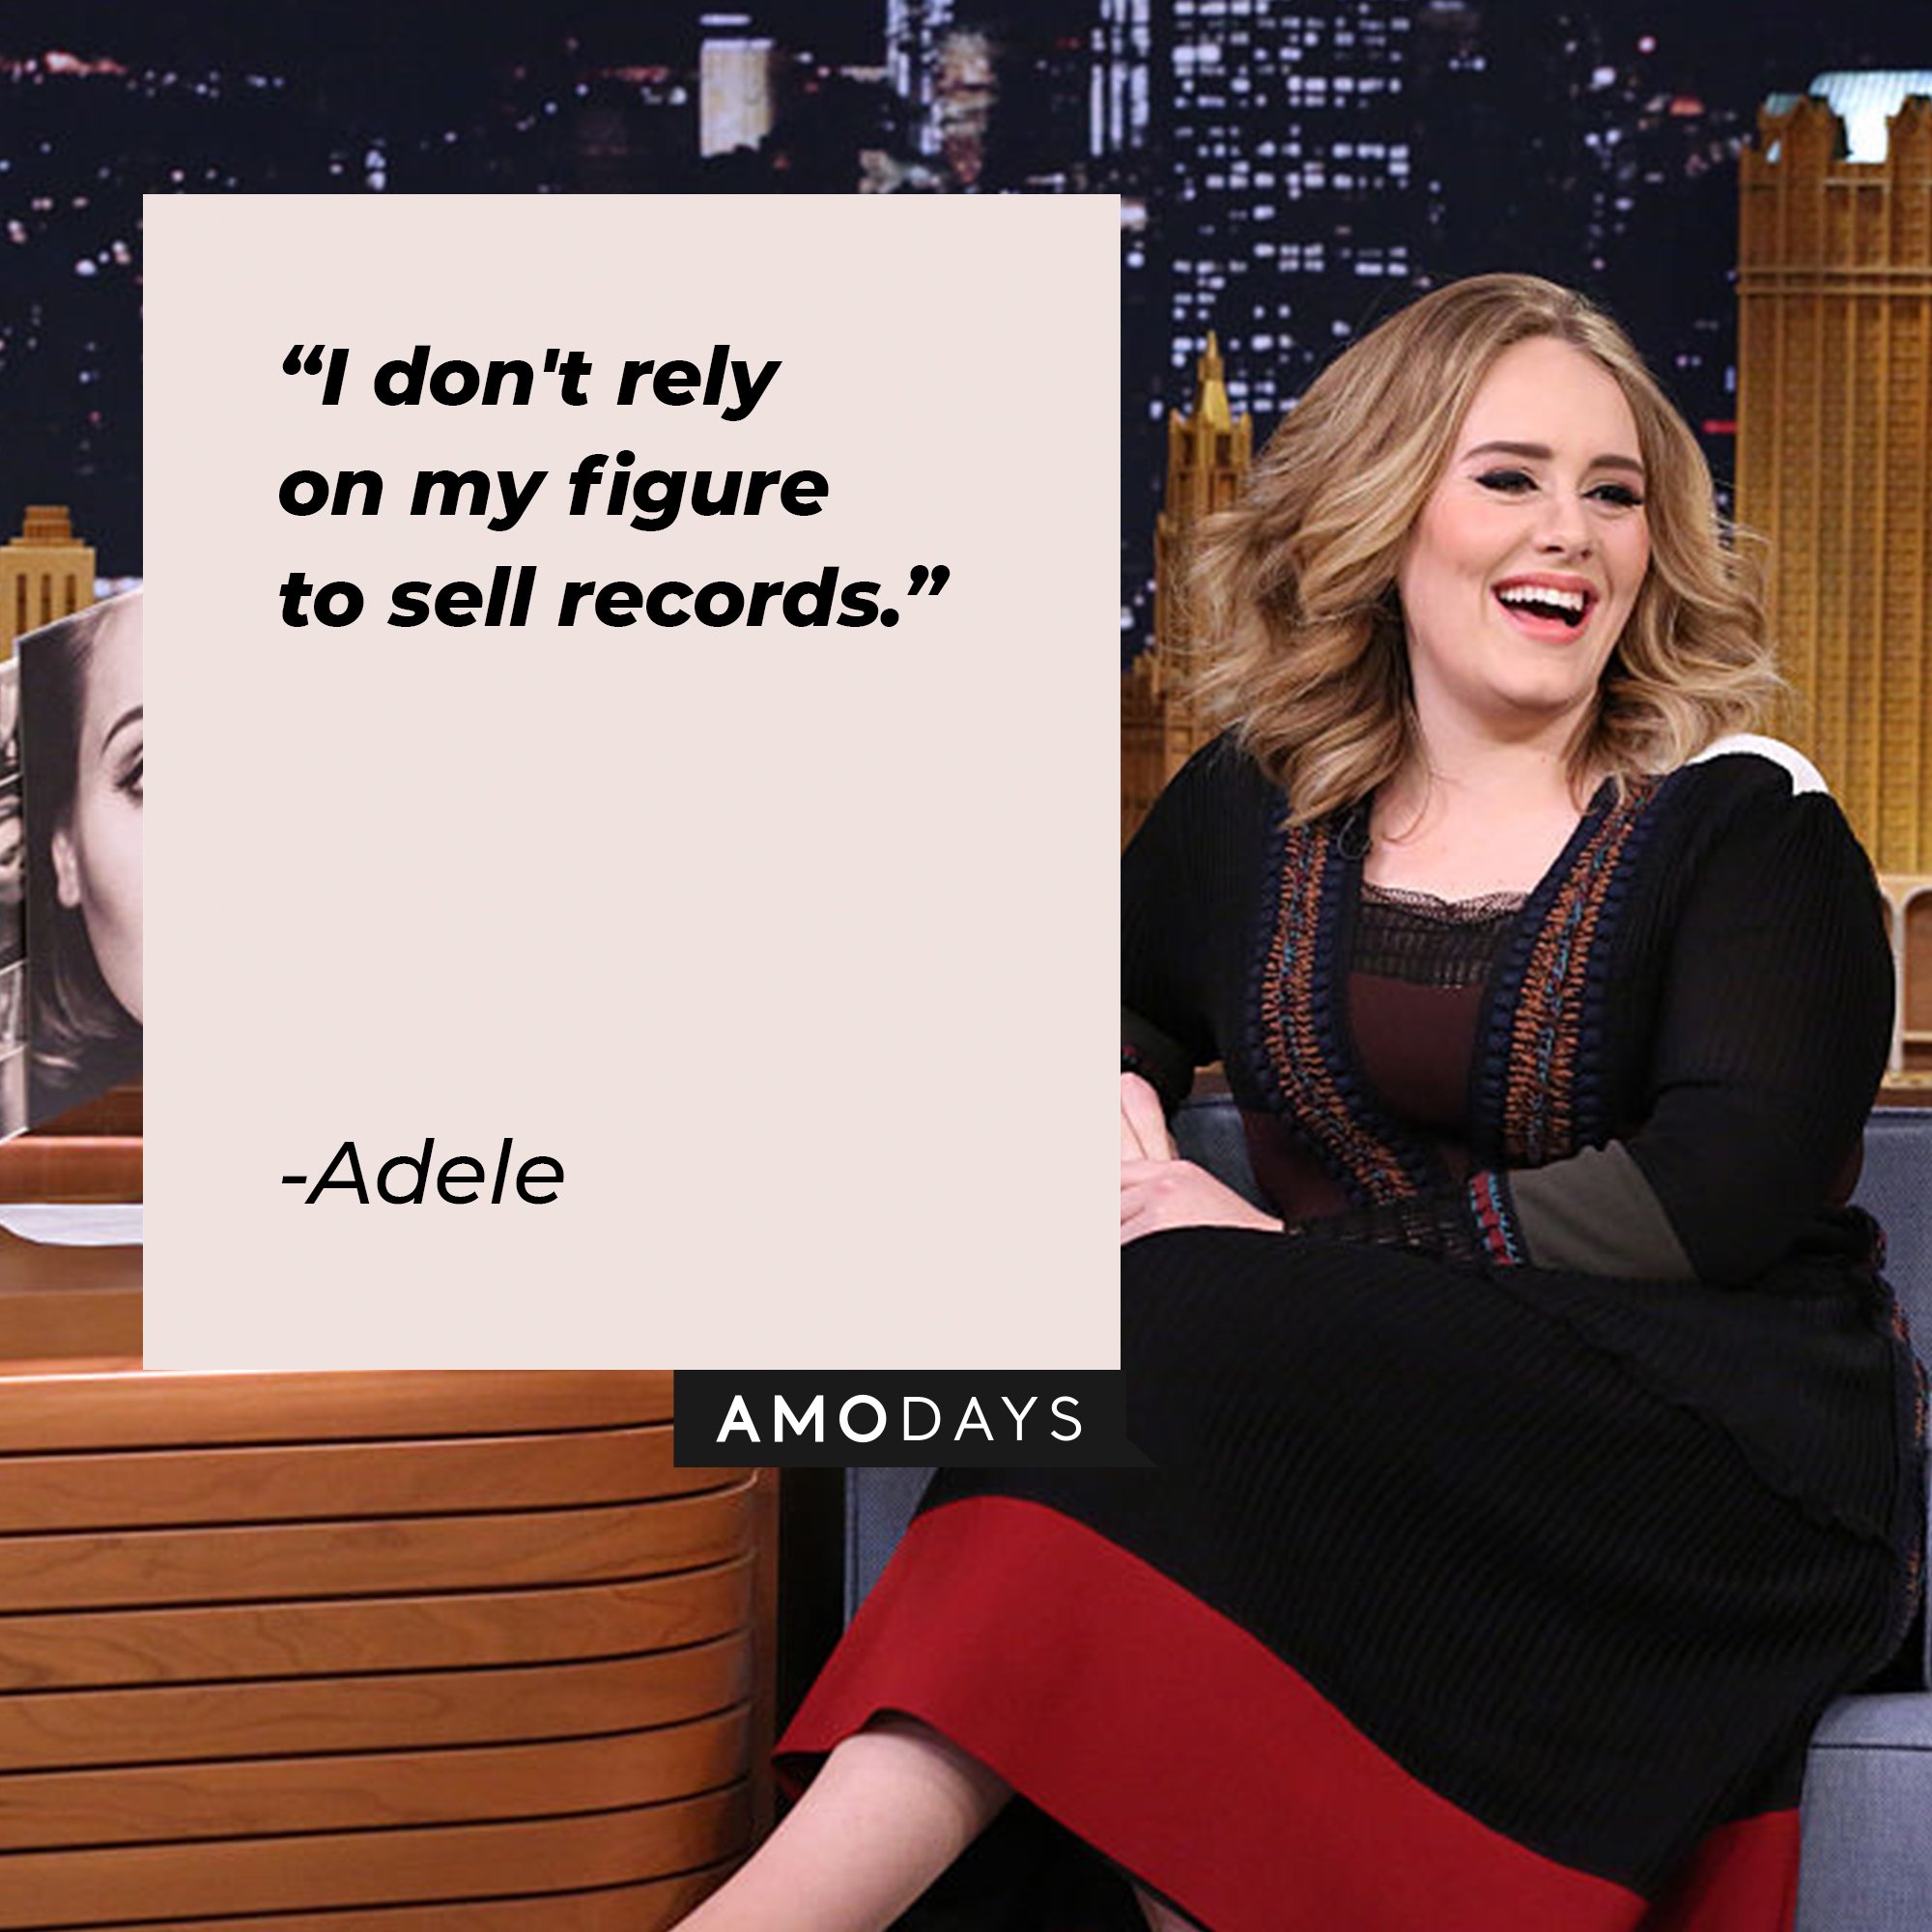 Adele’s quote: "I don't rely on my figure to sell records." | Image: AmoDays